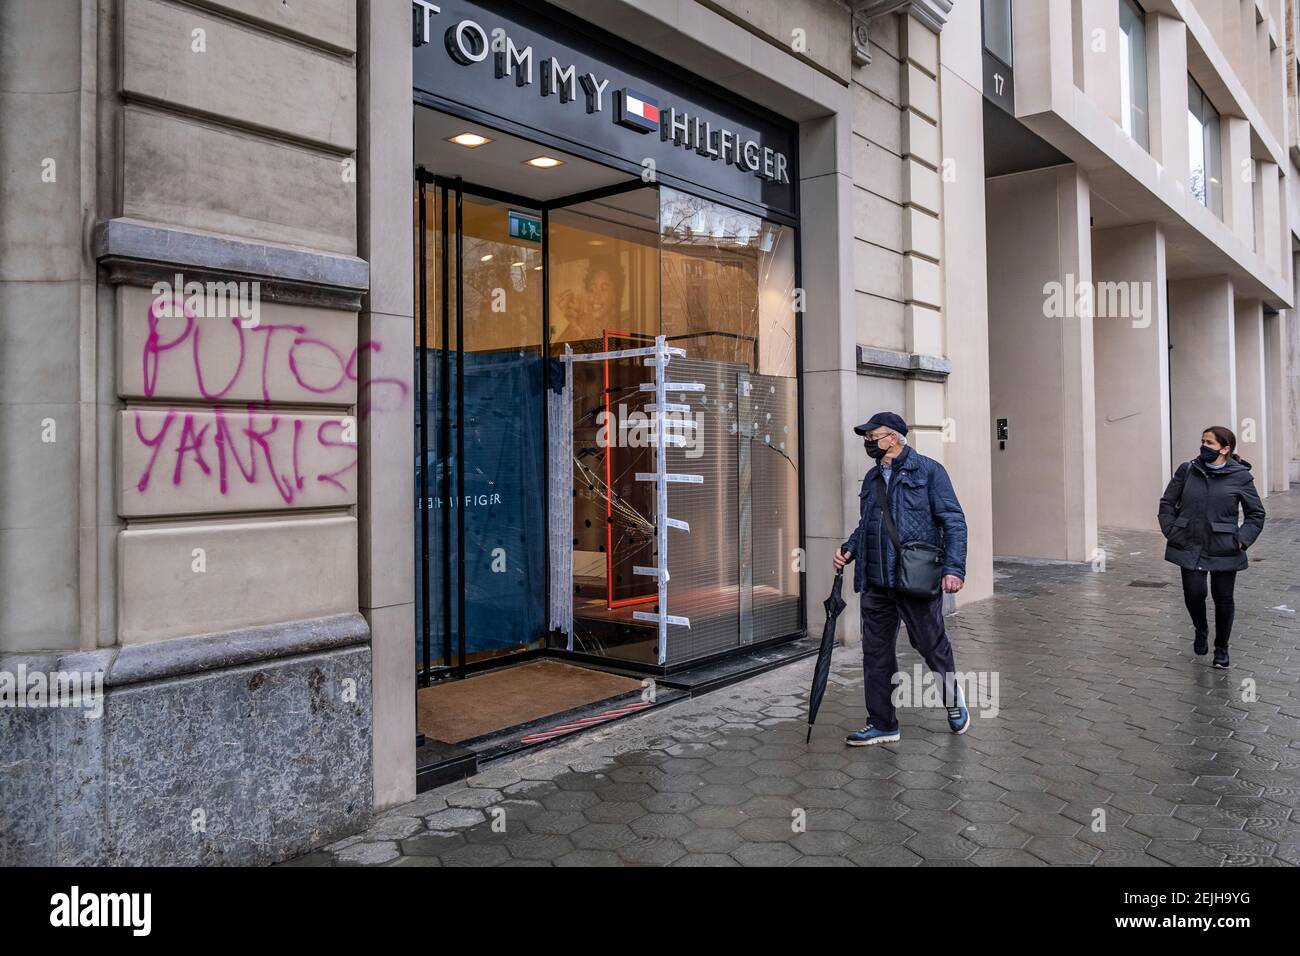 The Tommy Hilfiger store on Passeig Gràcia seen anti-vandalism protections its windows.More than 50 stores have suffered damage to their shop windows and some have been looted on